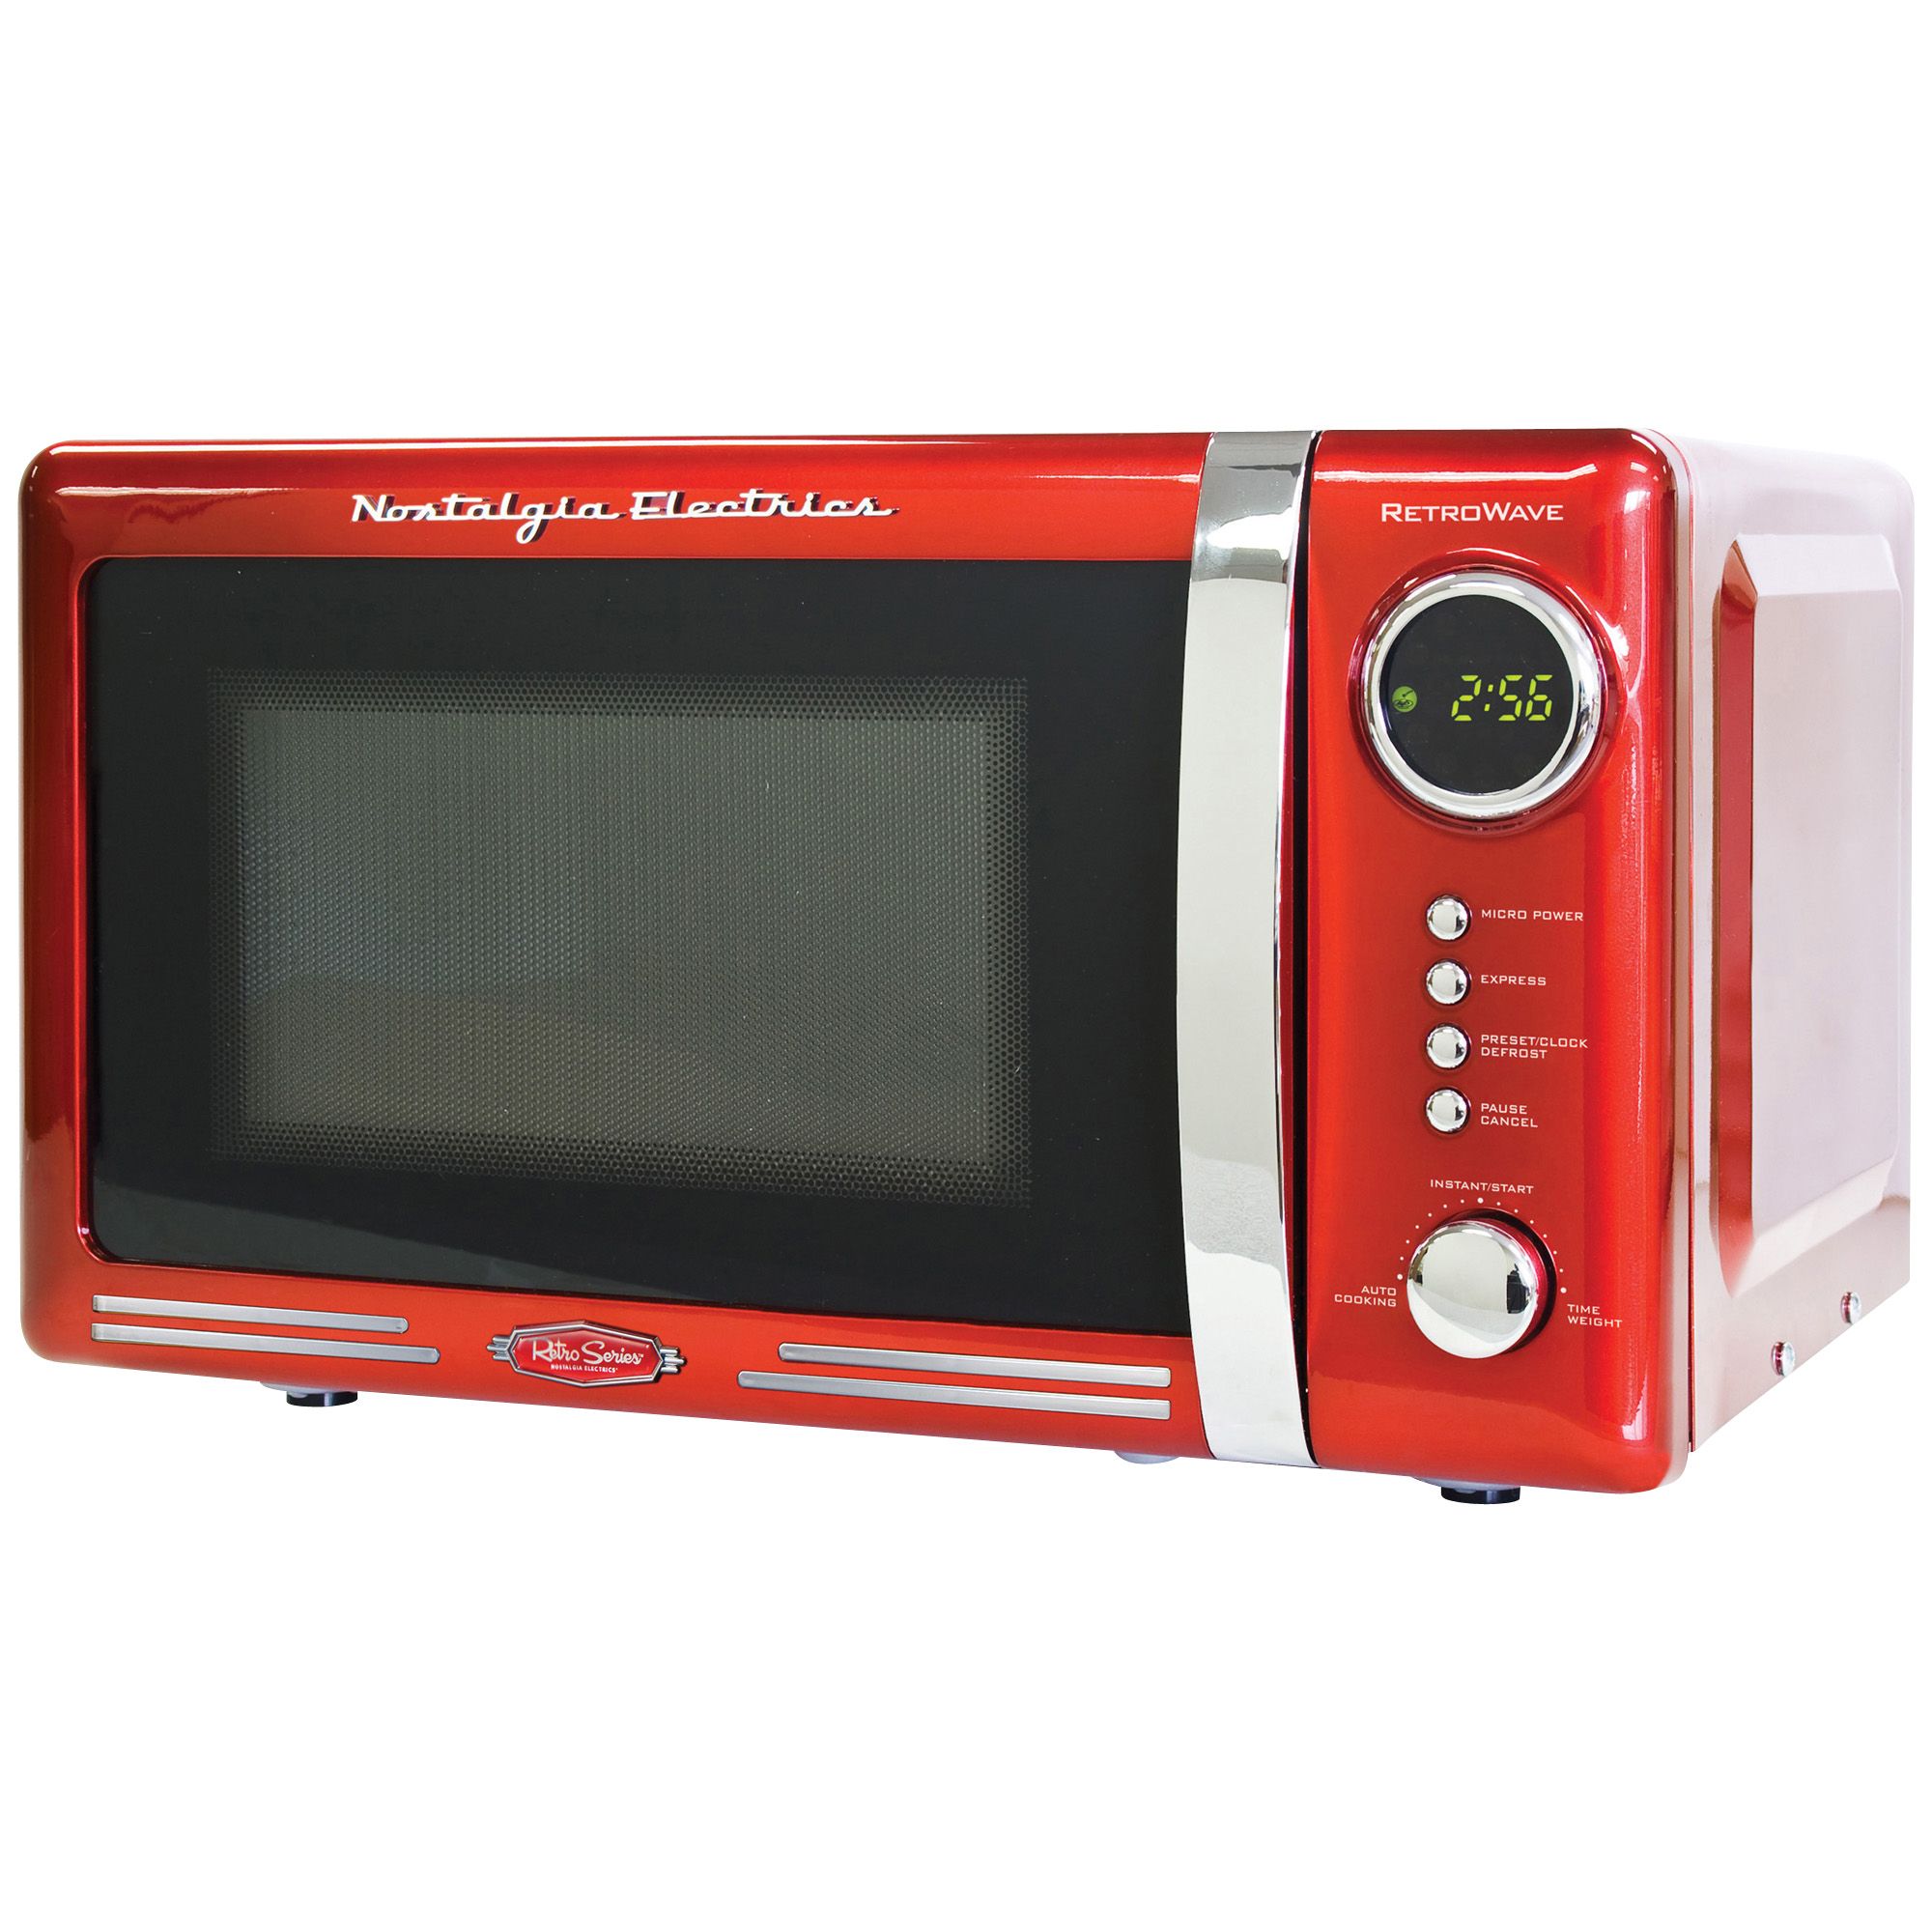  Nostalgia Retro Compact Countertop Microwave Oven - 0.7 Cu. Ft.  - 700-Watts with LED Digital Display - Child Lock - Easy Clean Interior -  Red : Home & Kitchen